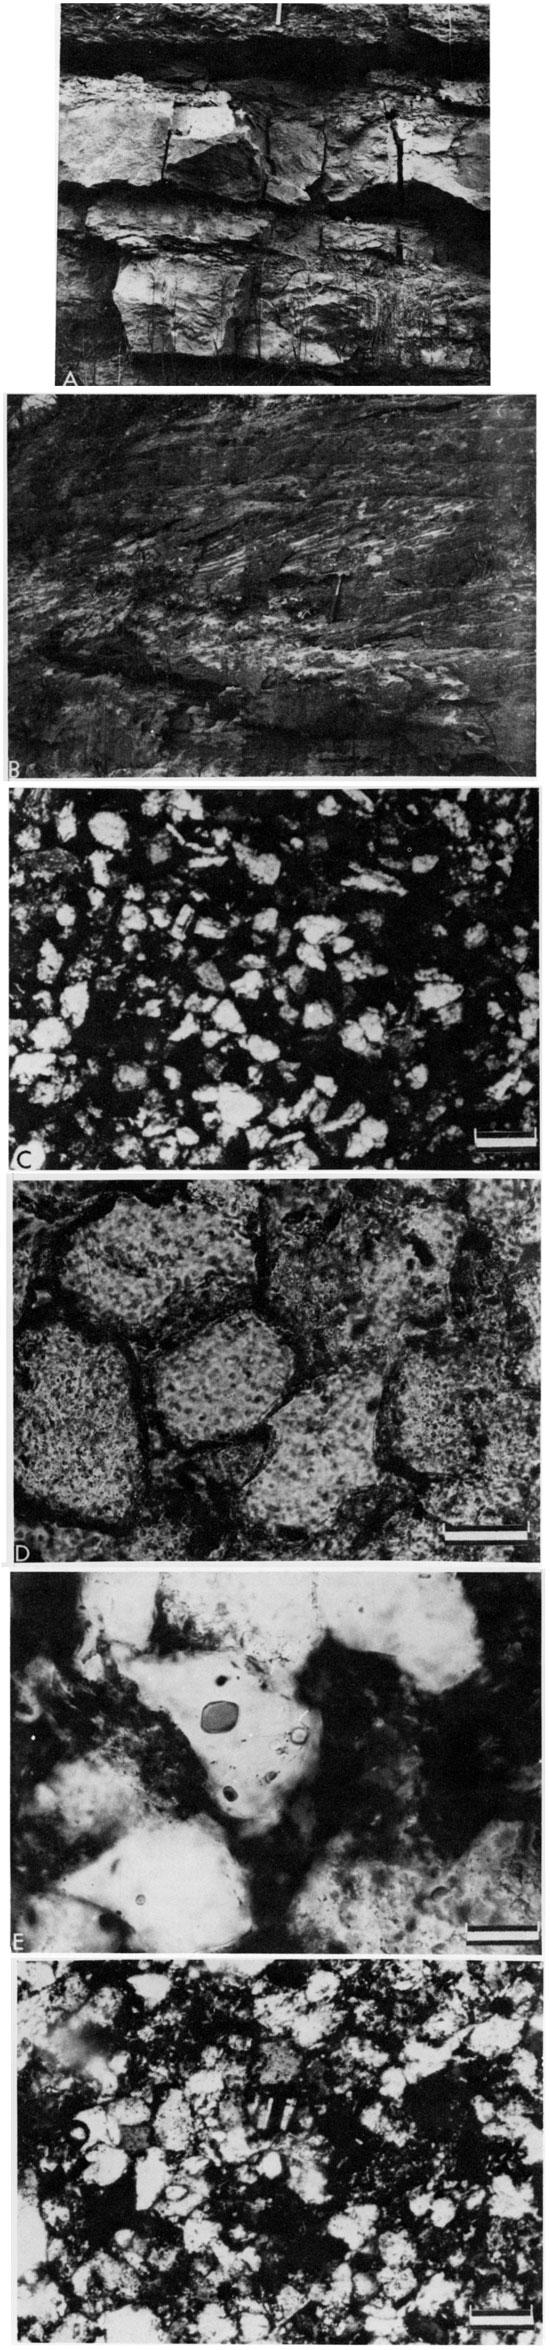 Six black and white photomicrographs; top two are of outcrop itself.